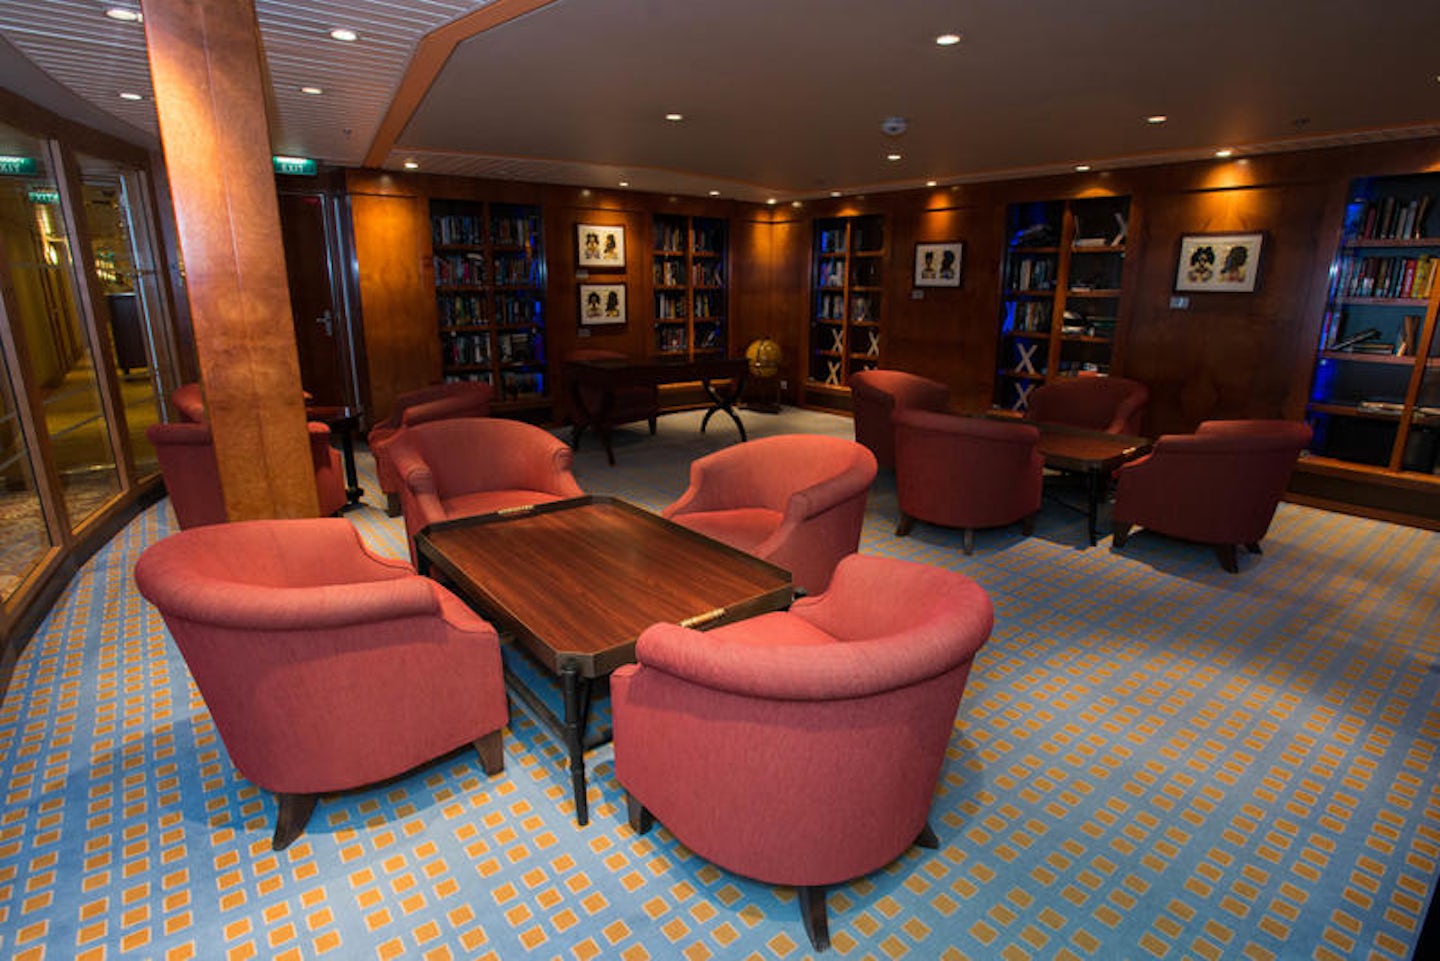 Library on Celebrity Summit